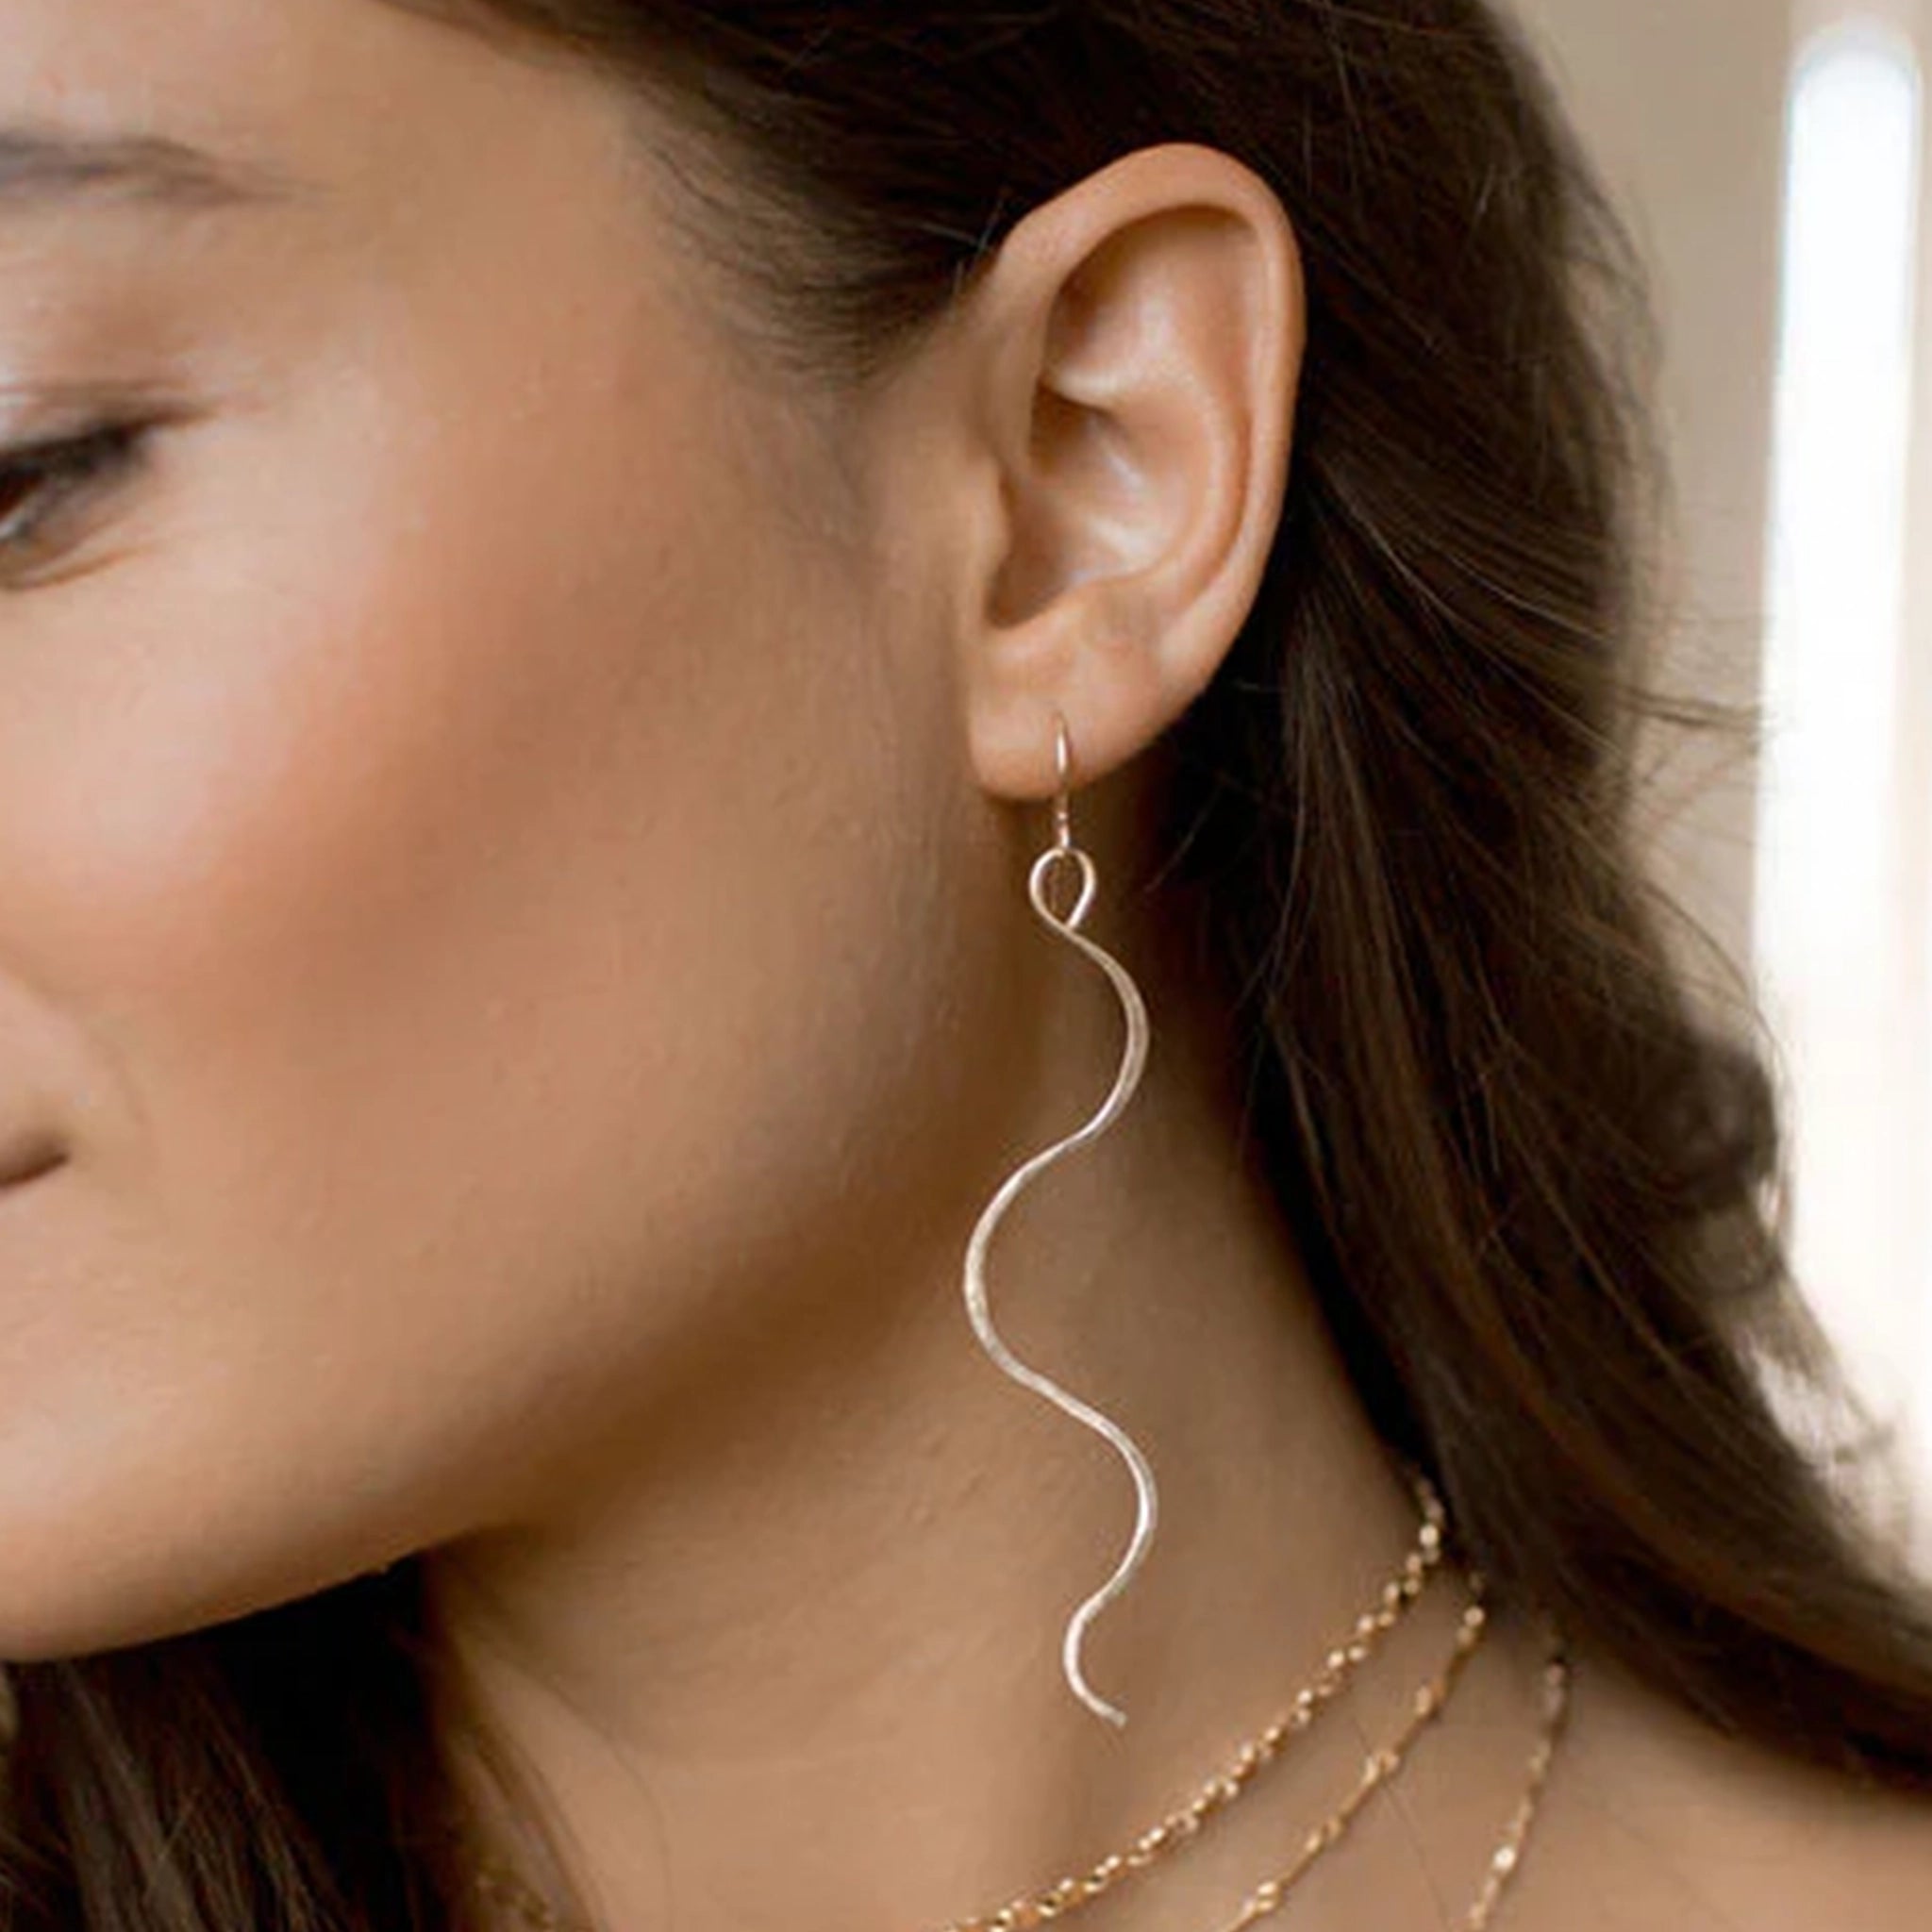 Two thin gold dangle earrings in a wavy &quot;serpent like&quot; shape with a hook earring back and a lightly hammered texture worn on a model and come down to about her mid neck.